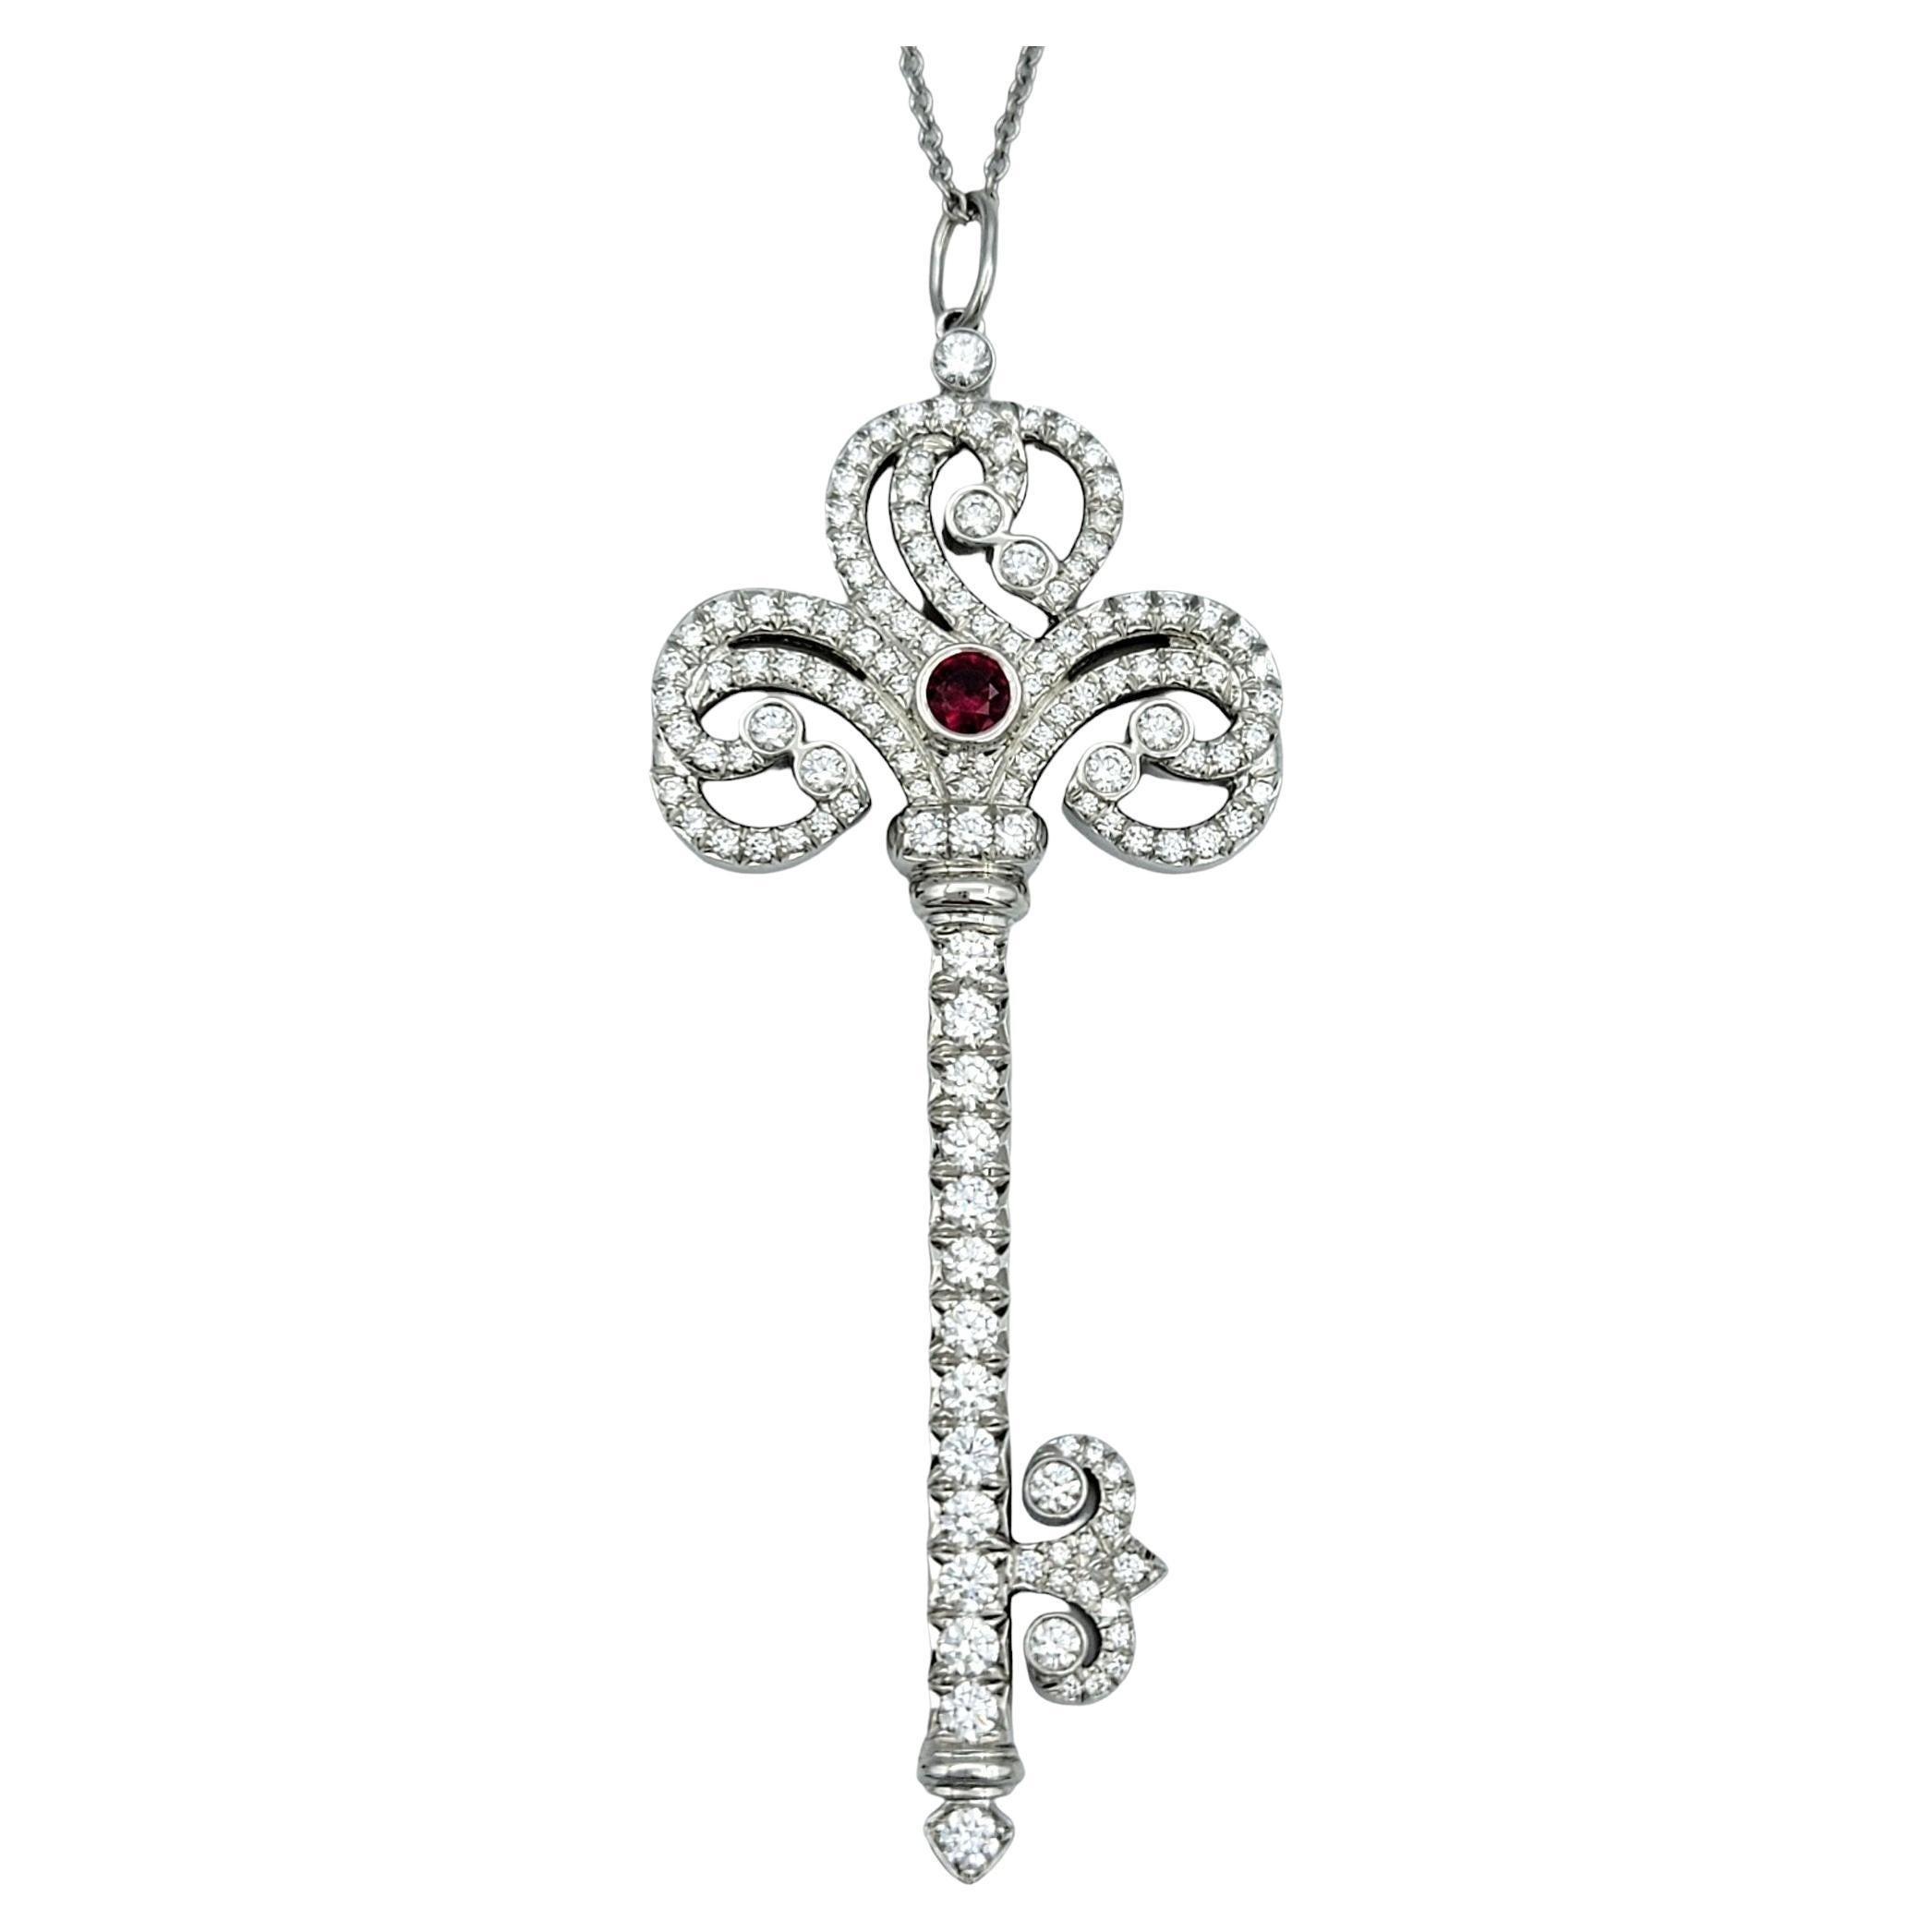 Contemporary Tiffany & Co. Diamond and Ruby Large Key Pendant Necklace in Polished Platinum For Sale